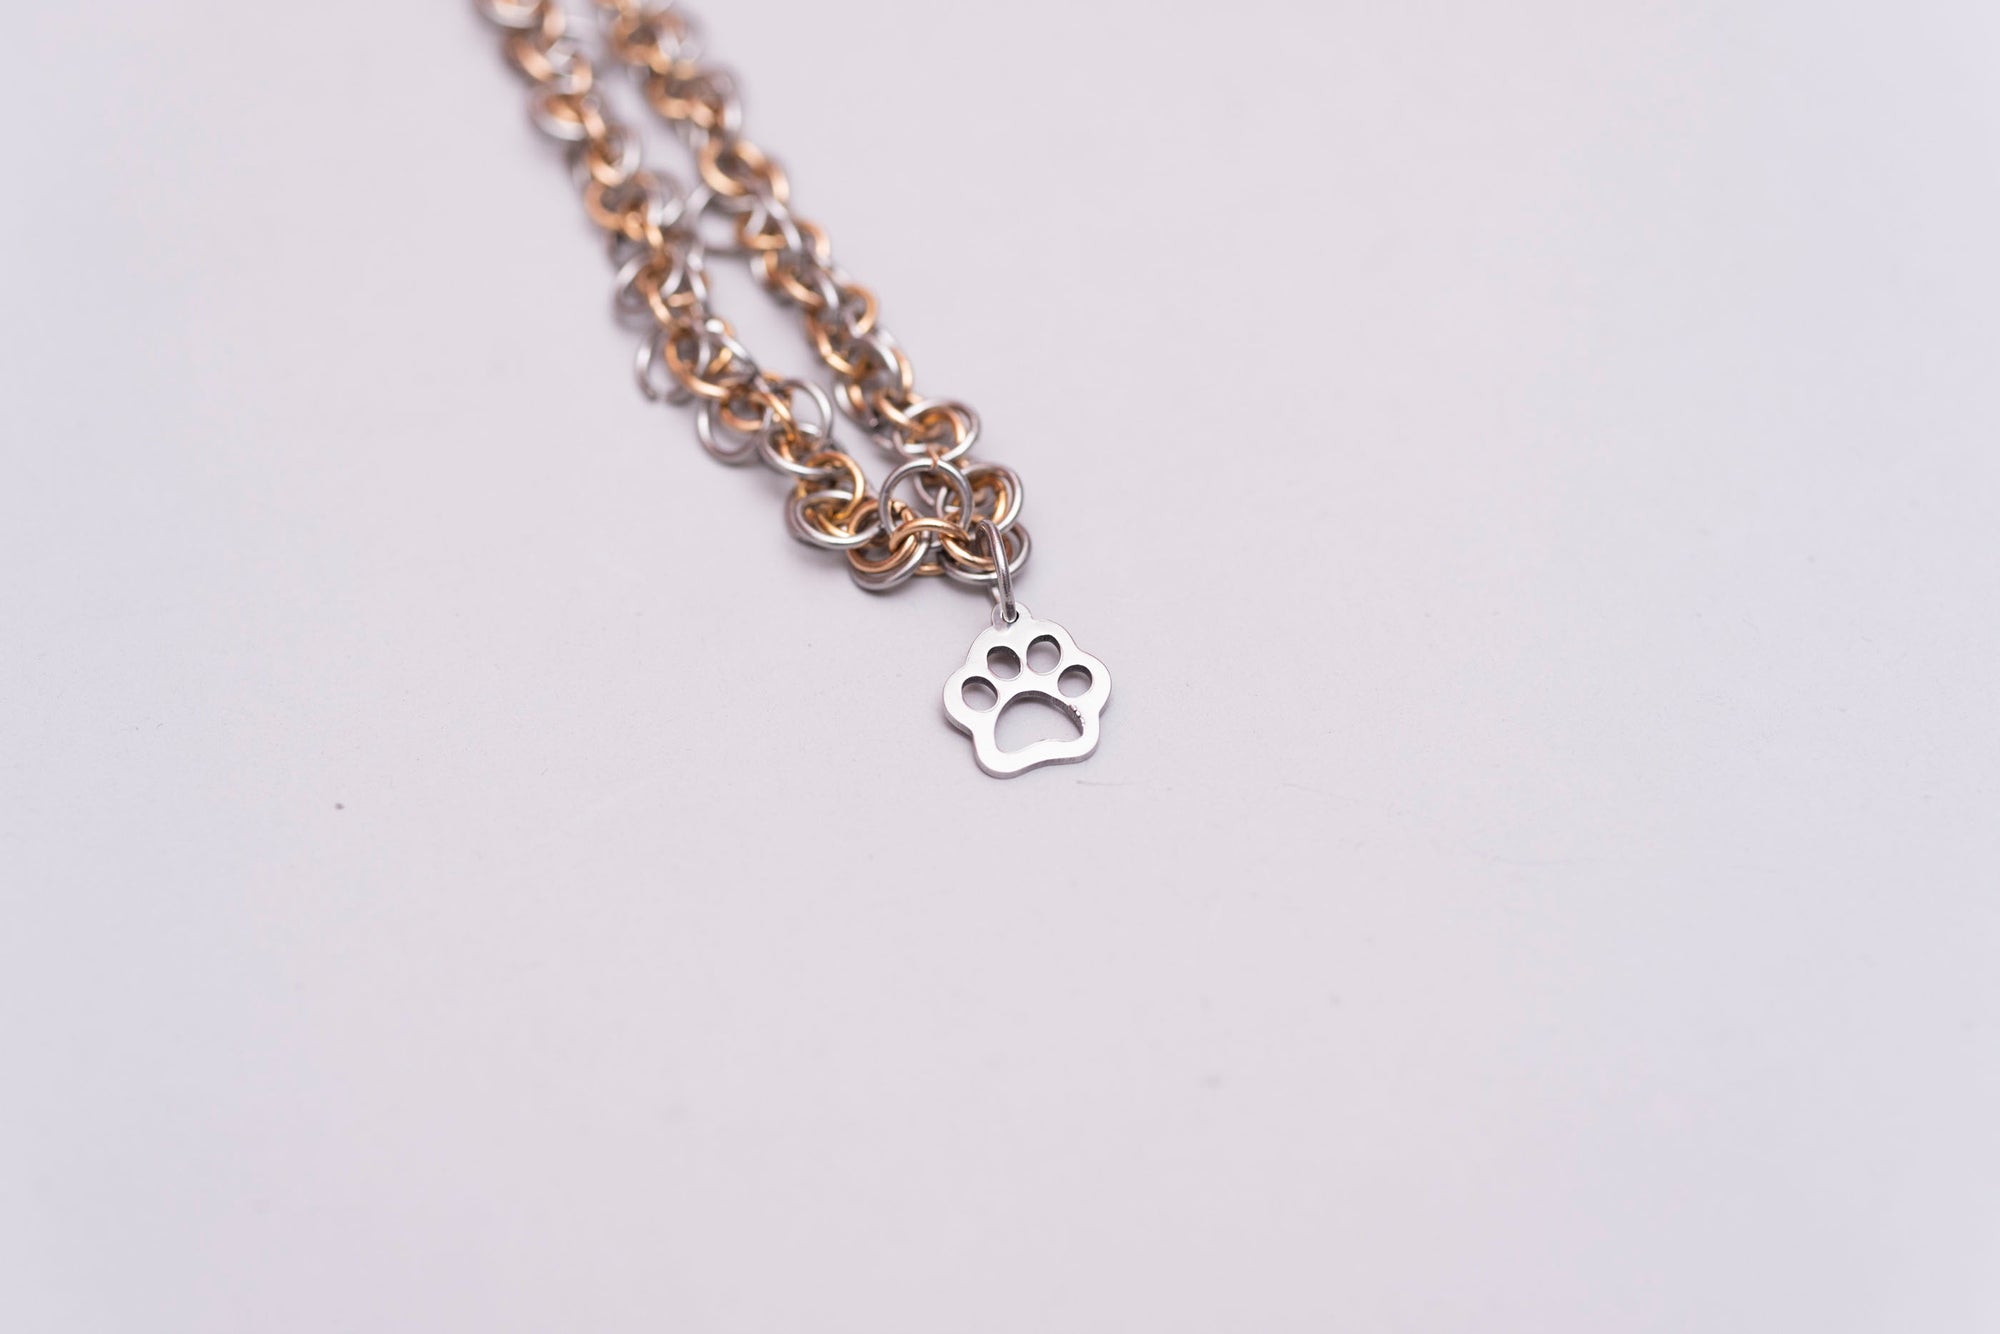 Triplet chain necklace with paw print charm 